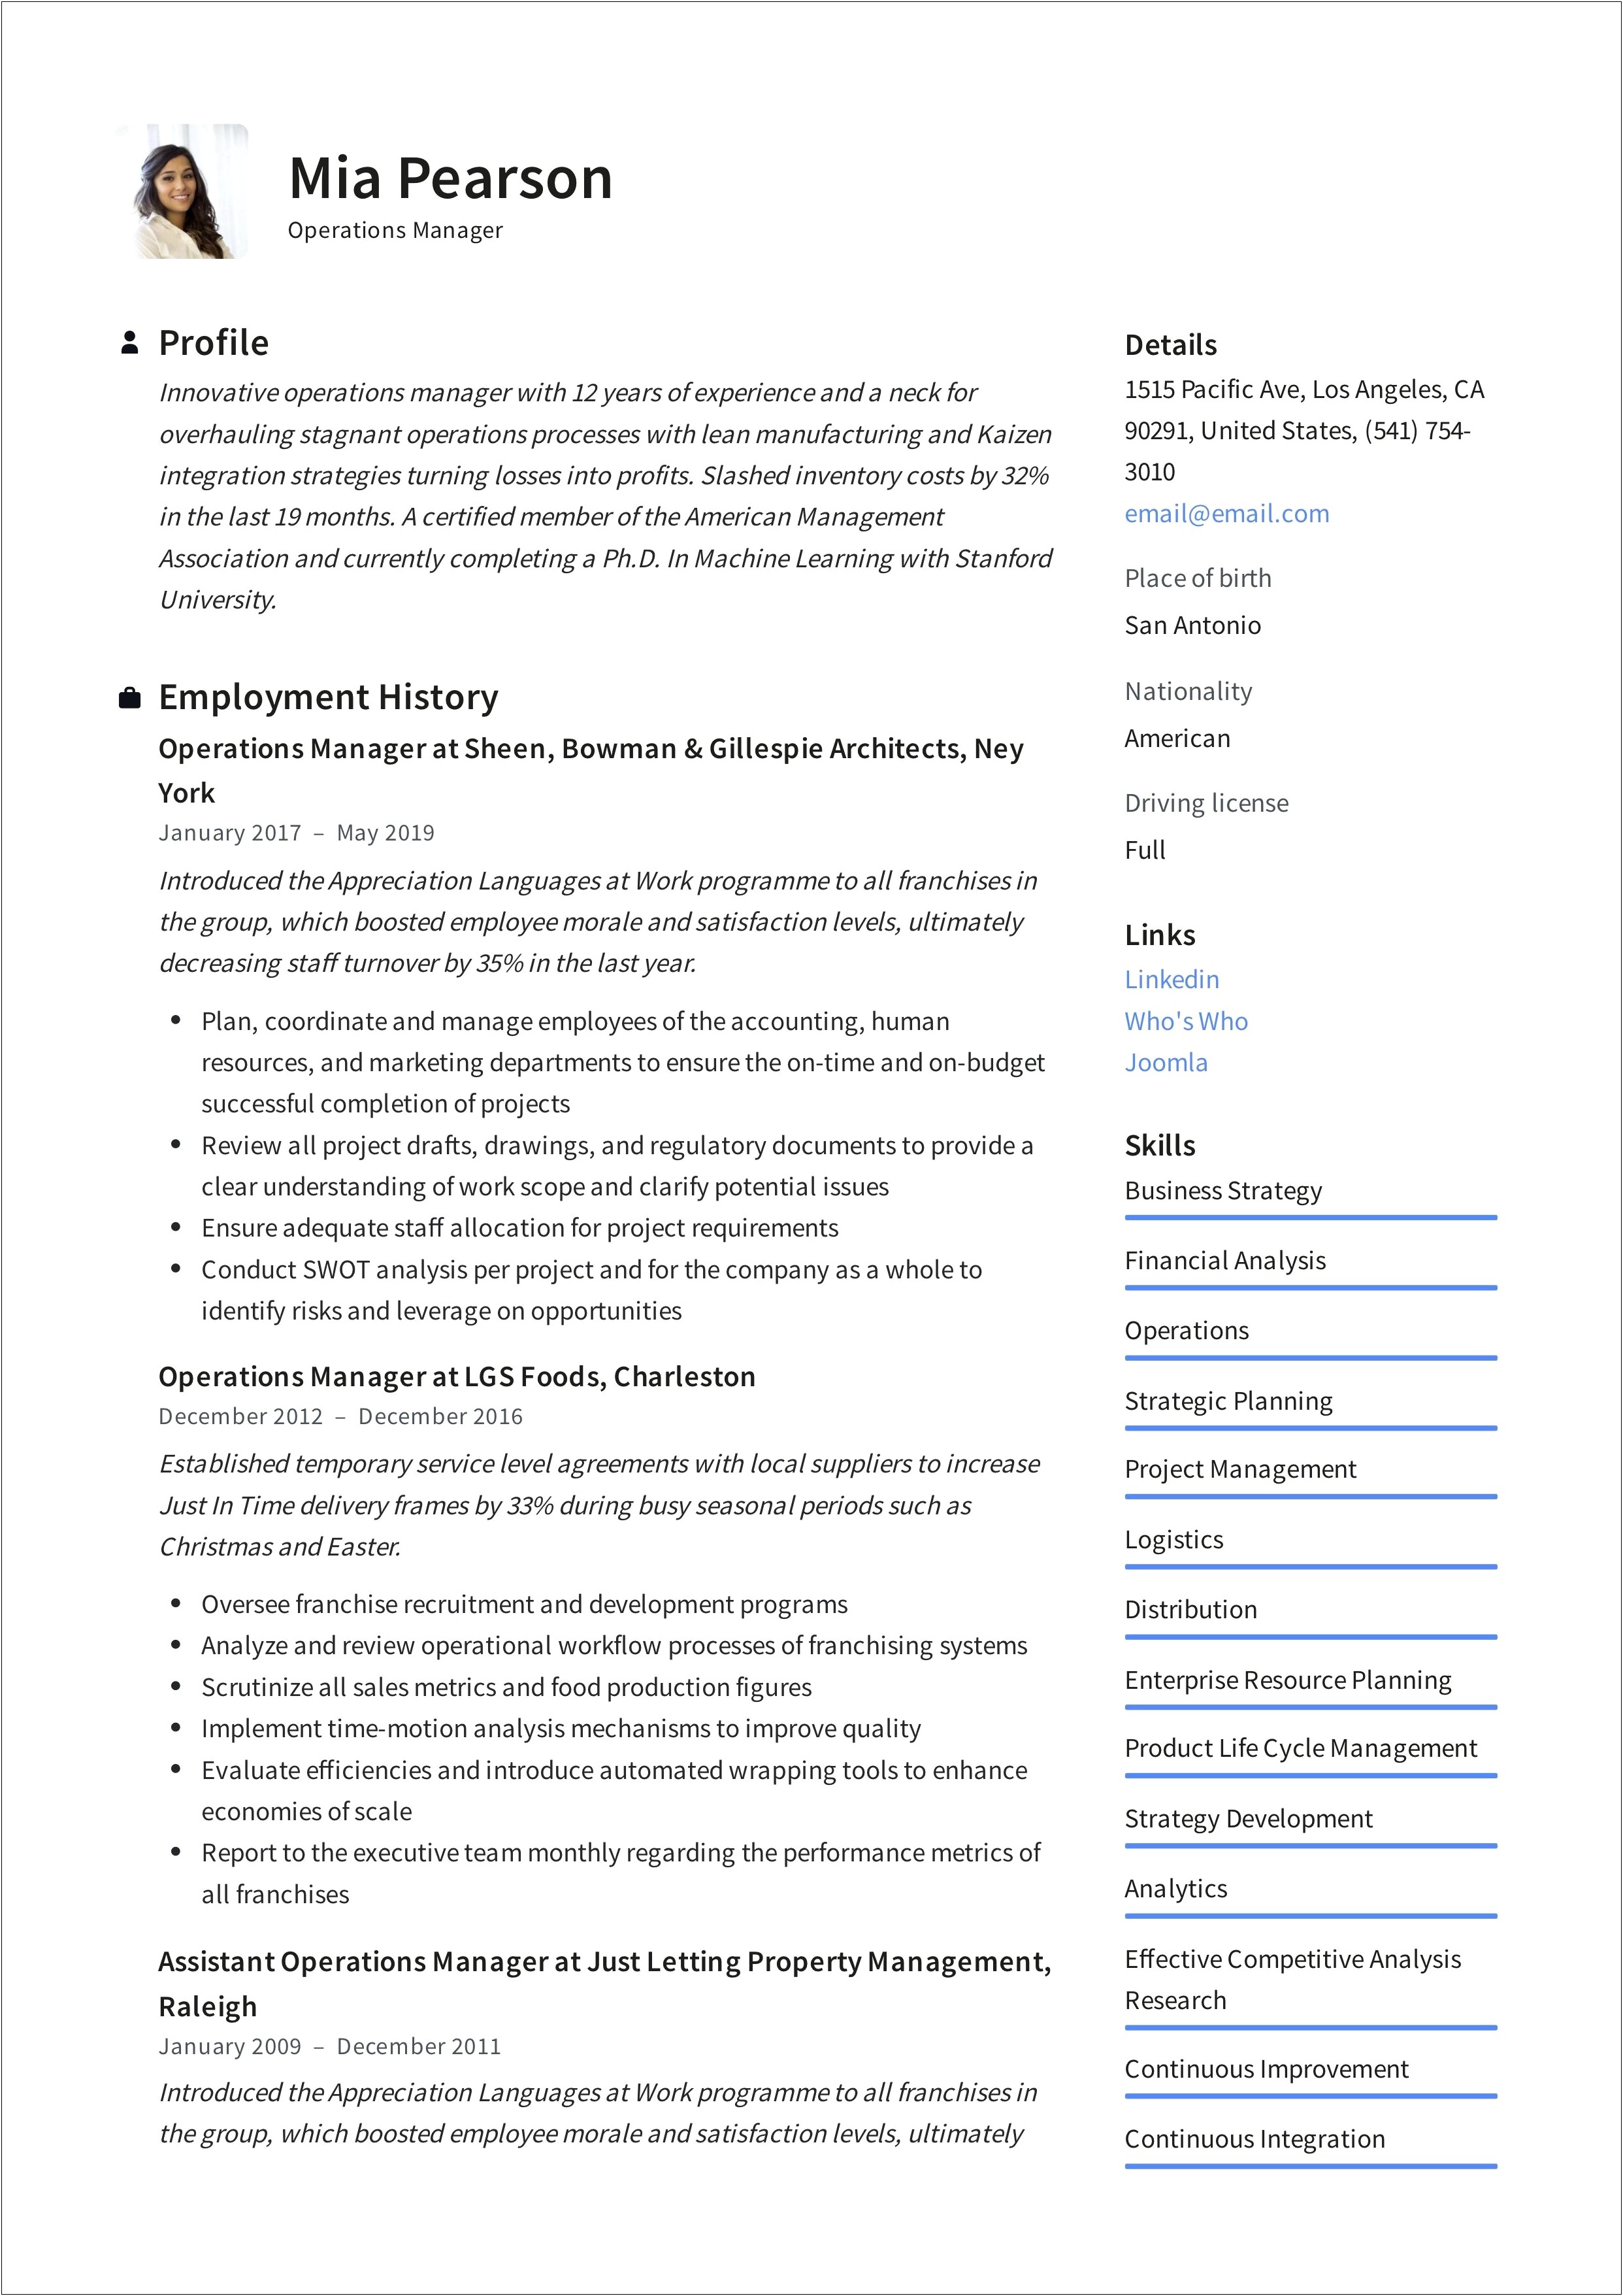 Continuous Improvement Buzz Words For Resume